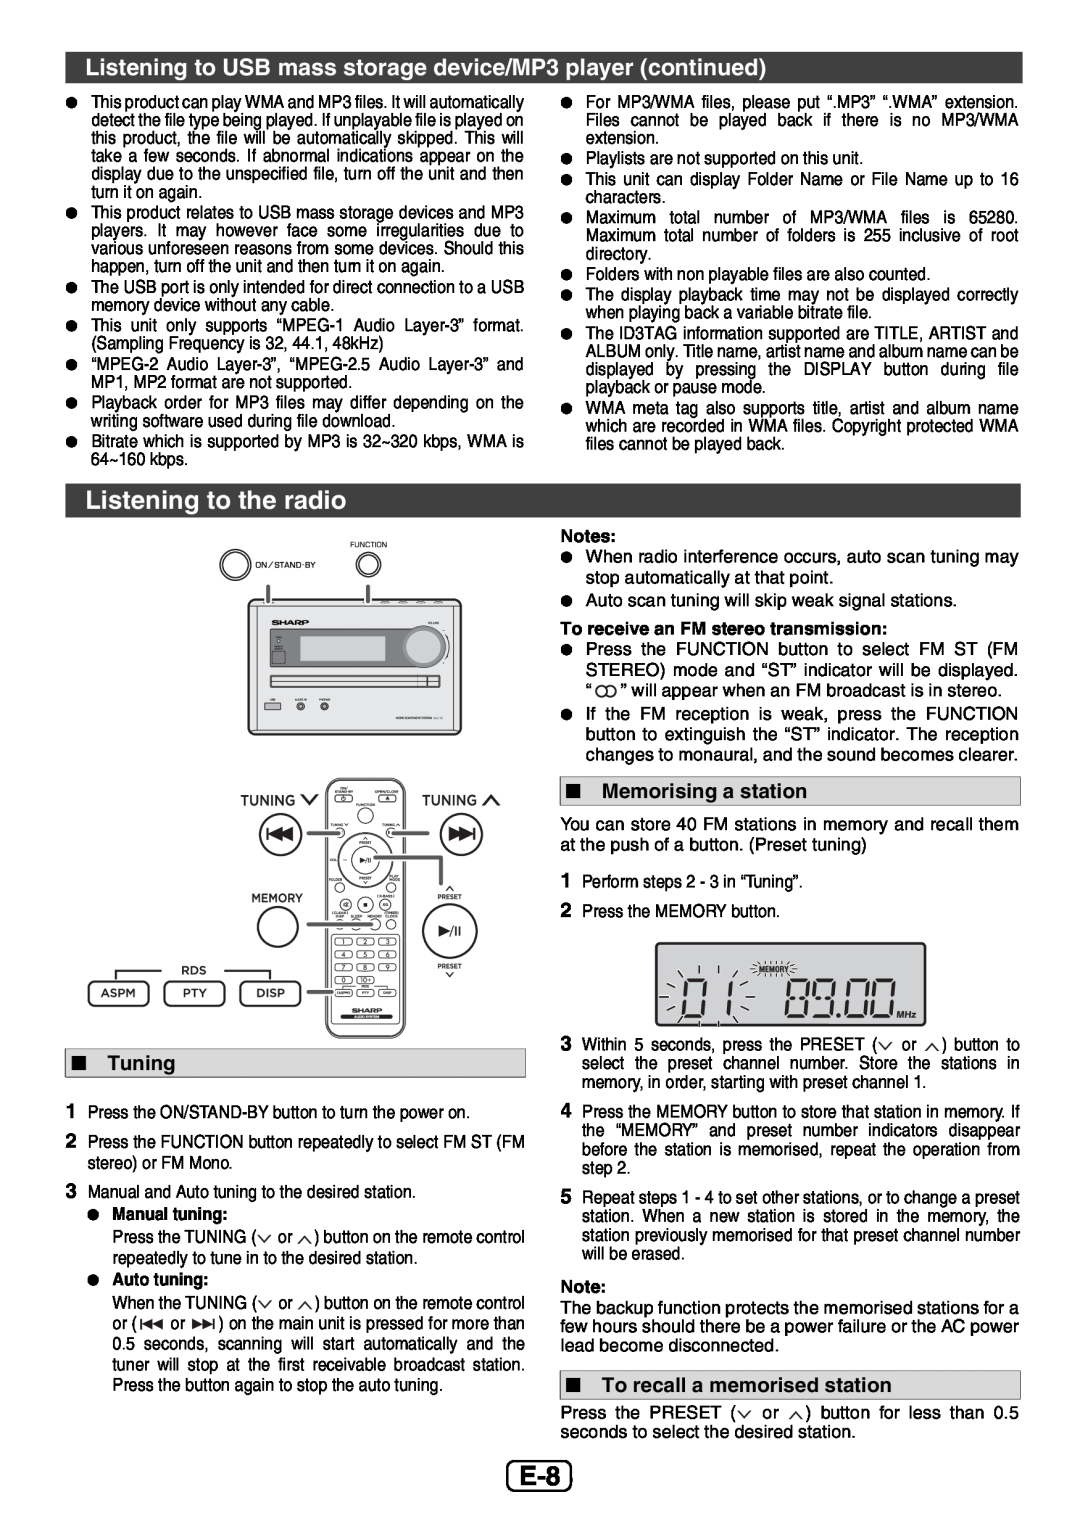 Sharp XL-E12H operation manual Listening to the radio, Tuning, Memorising a station, To recall a memorised station 